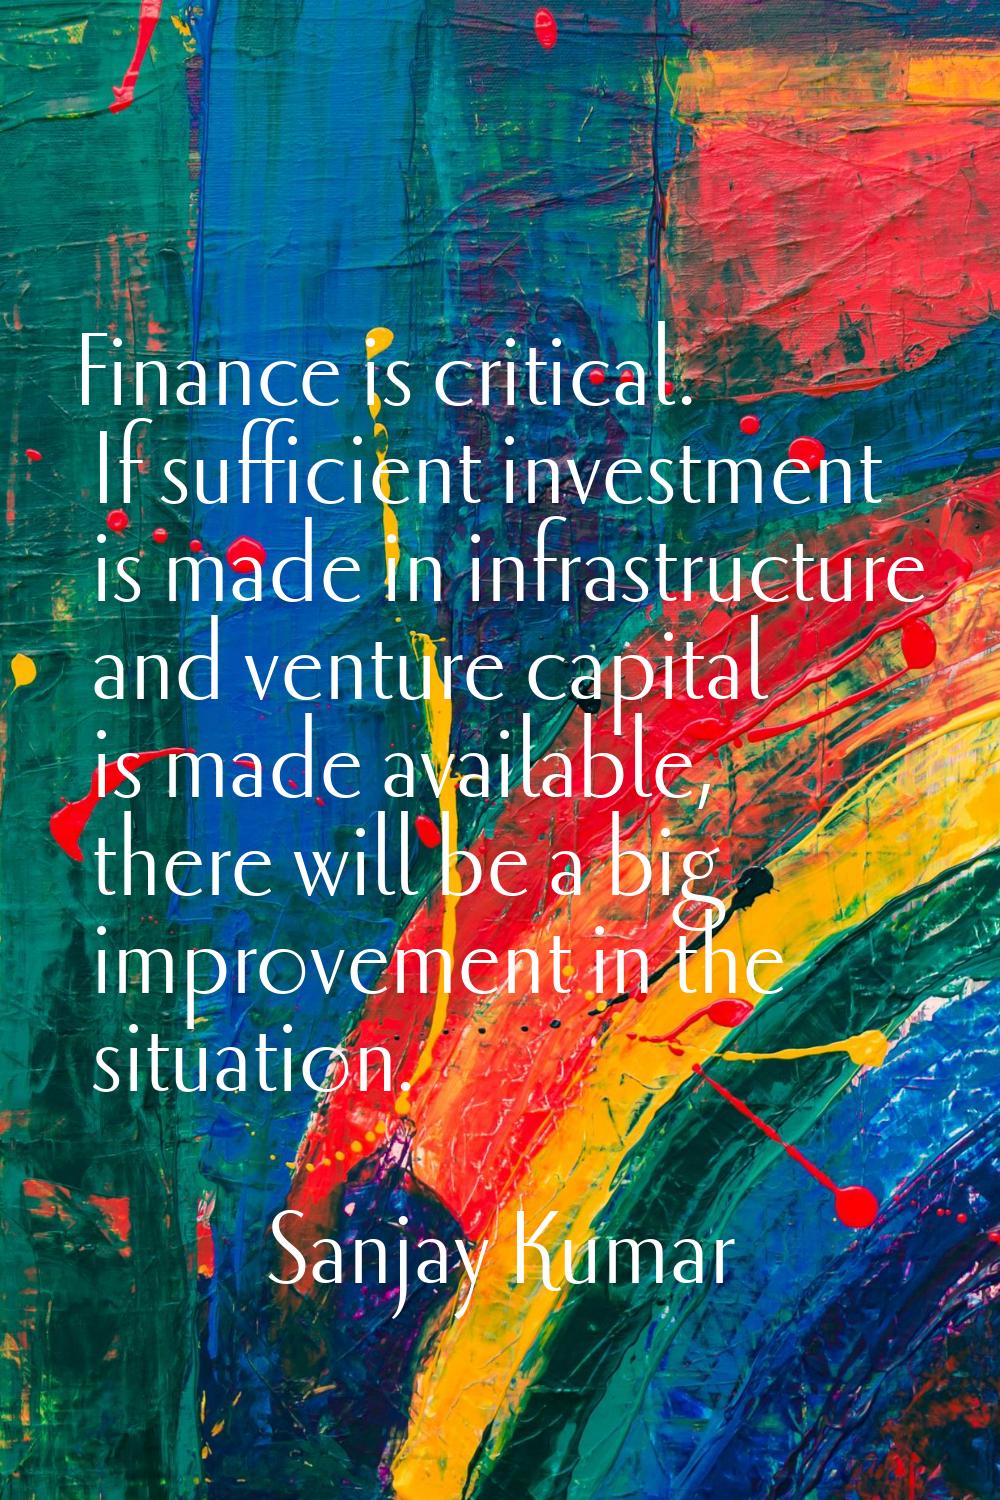 Finance is critical. If sufficient investment is made in infrastructure and venture capital is made